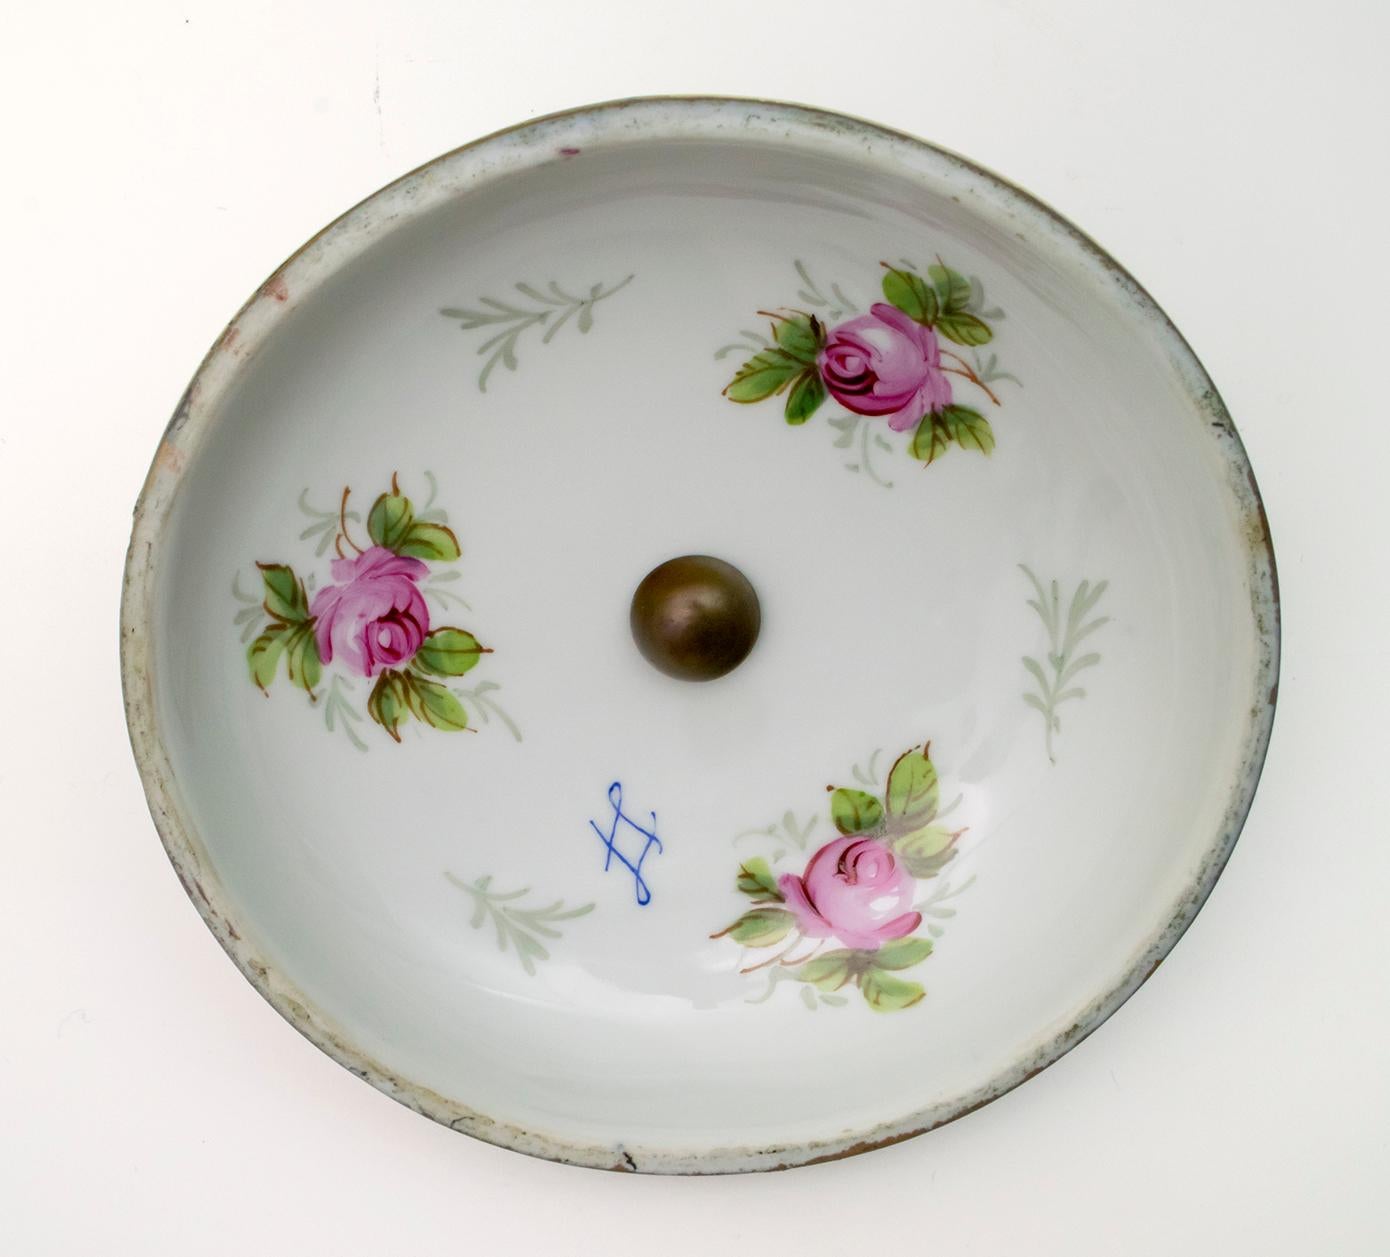 Signed E. Froger 19th Century French Porcelain Potpourri by Sevres, 1880 For Sale 4